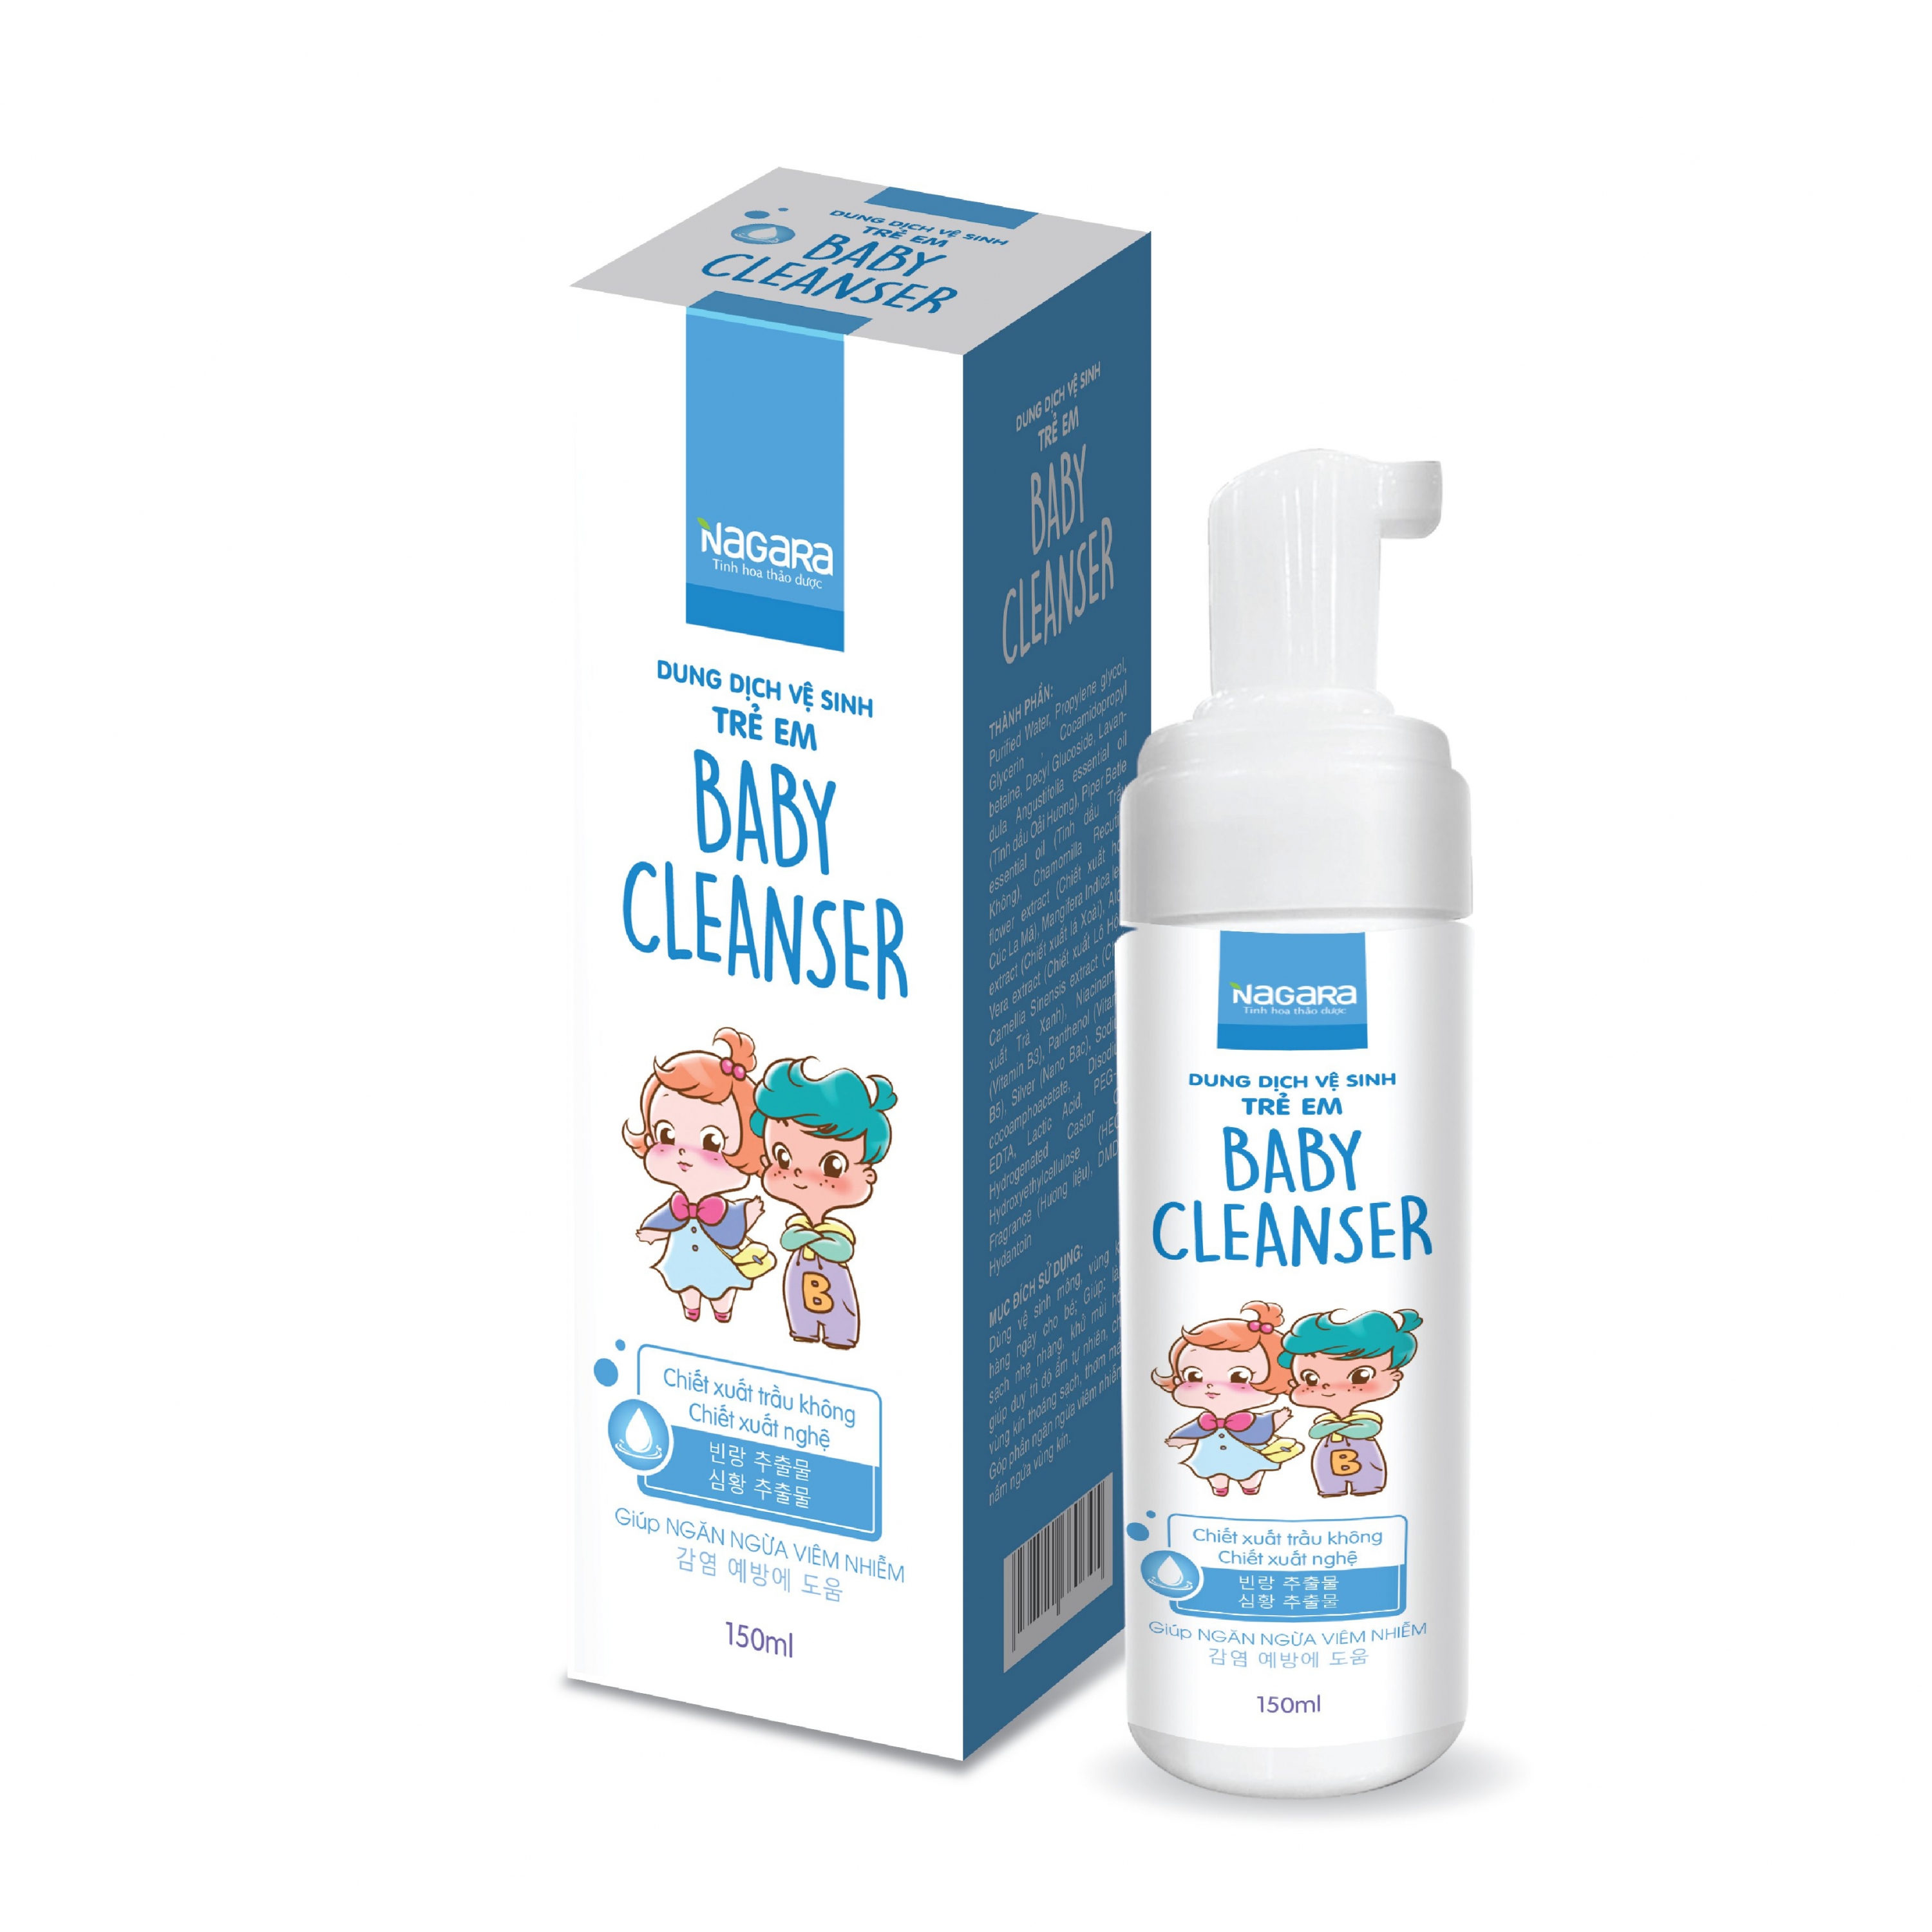 DUNG DỊCH VỆ SINH TRẺ EM BABY CLEANSER